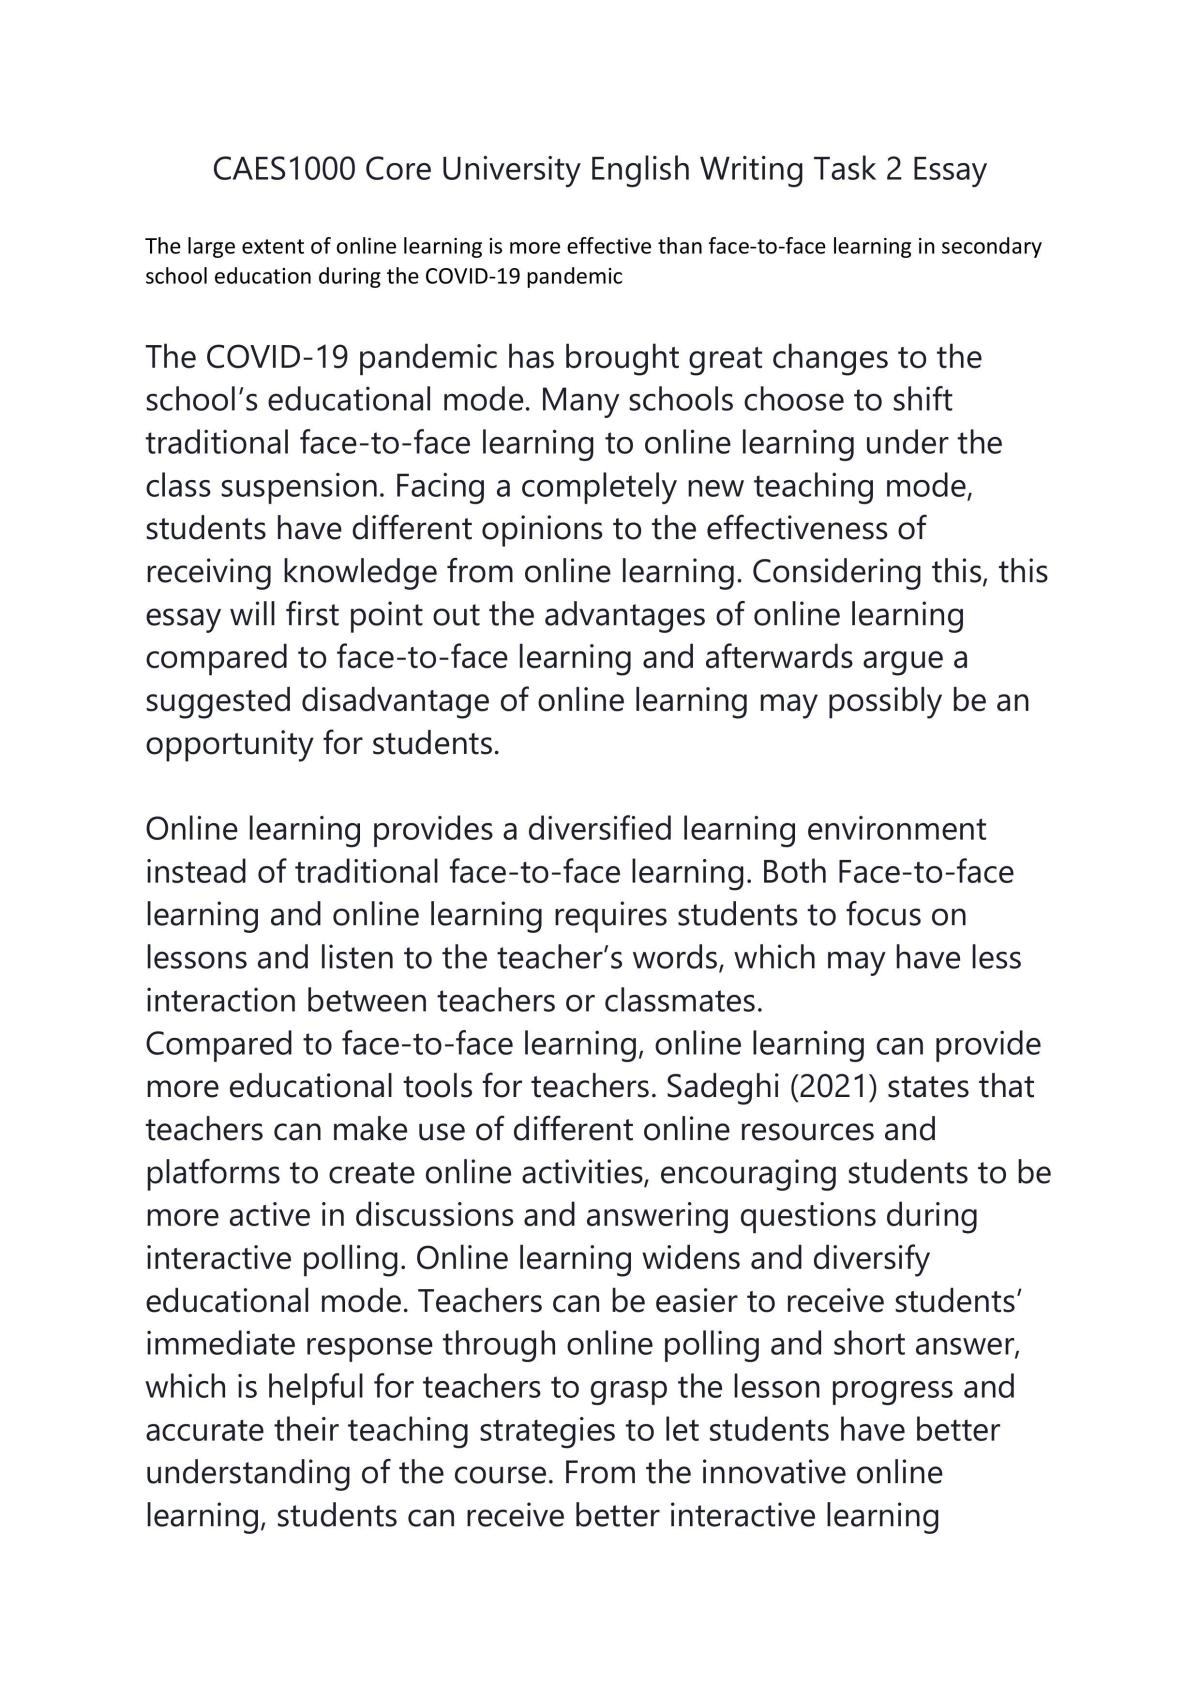 The large extent of online learning is more effective than face-to-face learning in secondary school education during the COVID-19 pandemic  - Page 1